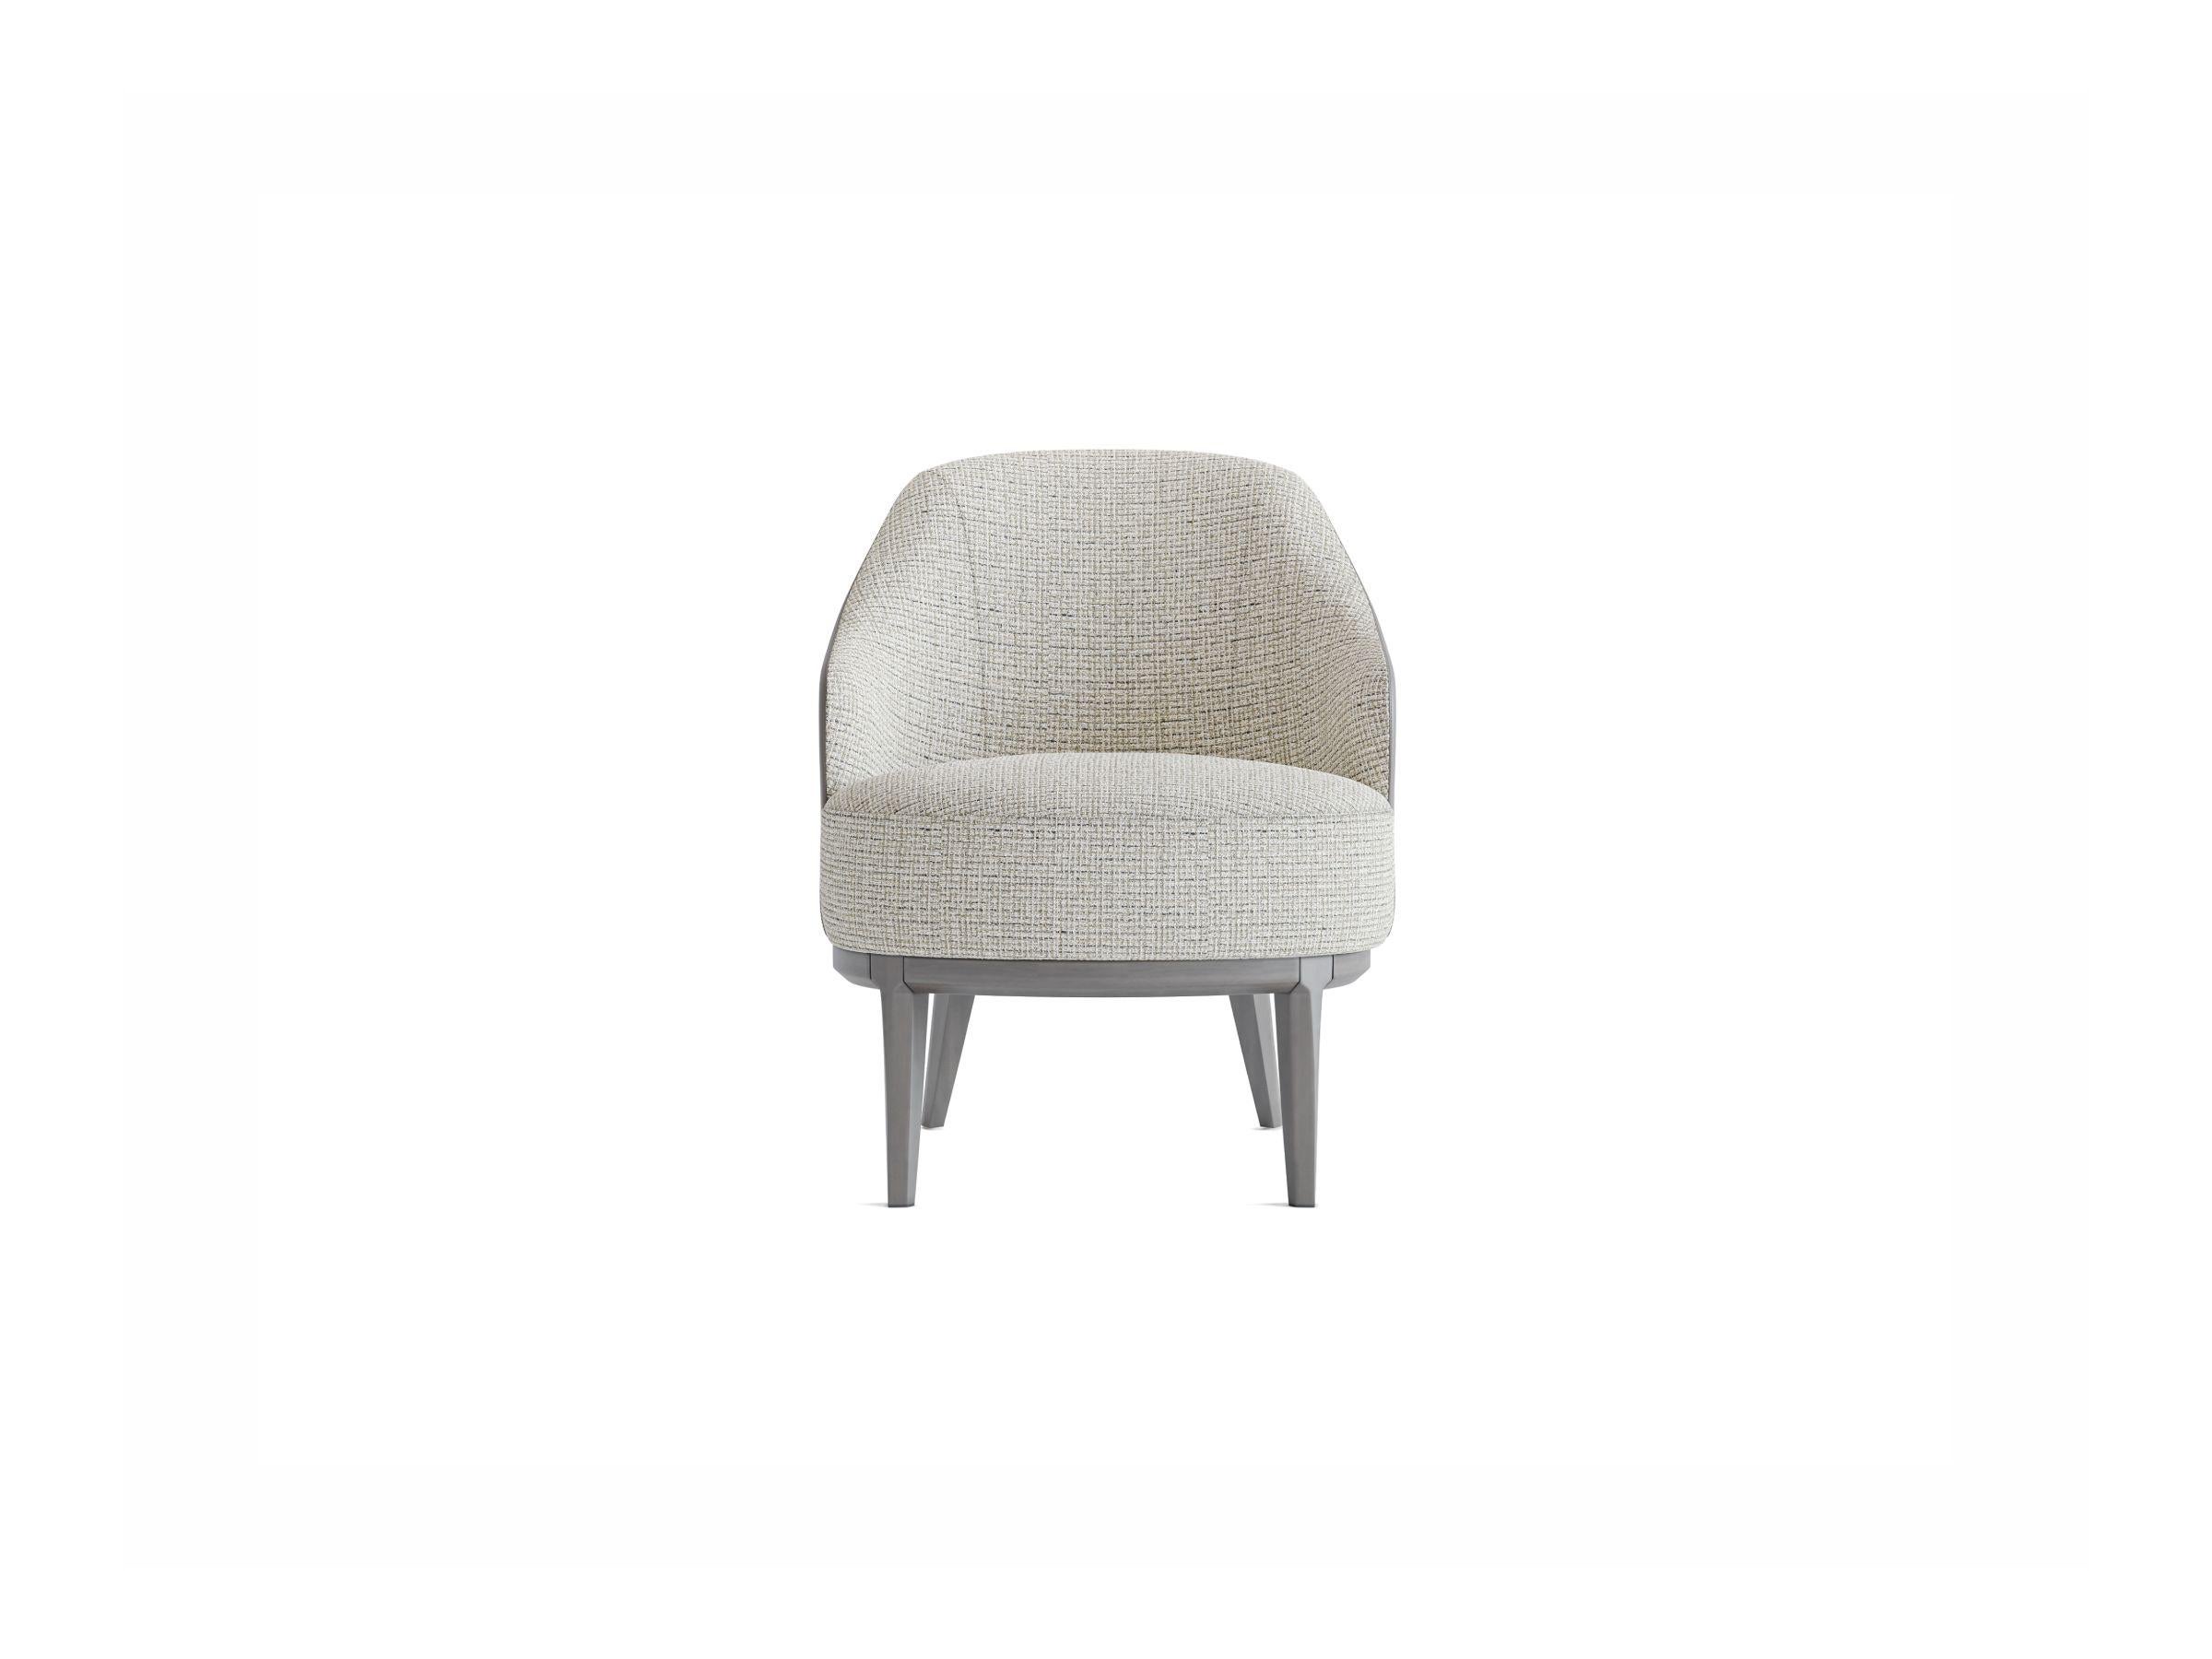 Large, comfortable, and functional. Every detail of its graceful design provides a chic appearance to the TOLINA Armchair. The warm wood tones of this chair, coupled with a classic fabric design, creates a perfect harmony with the rest of your